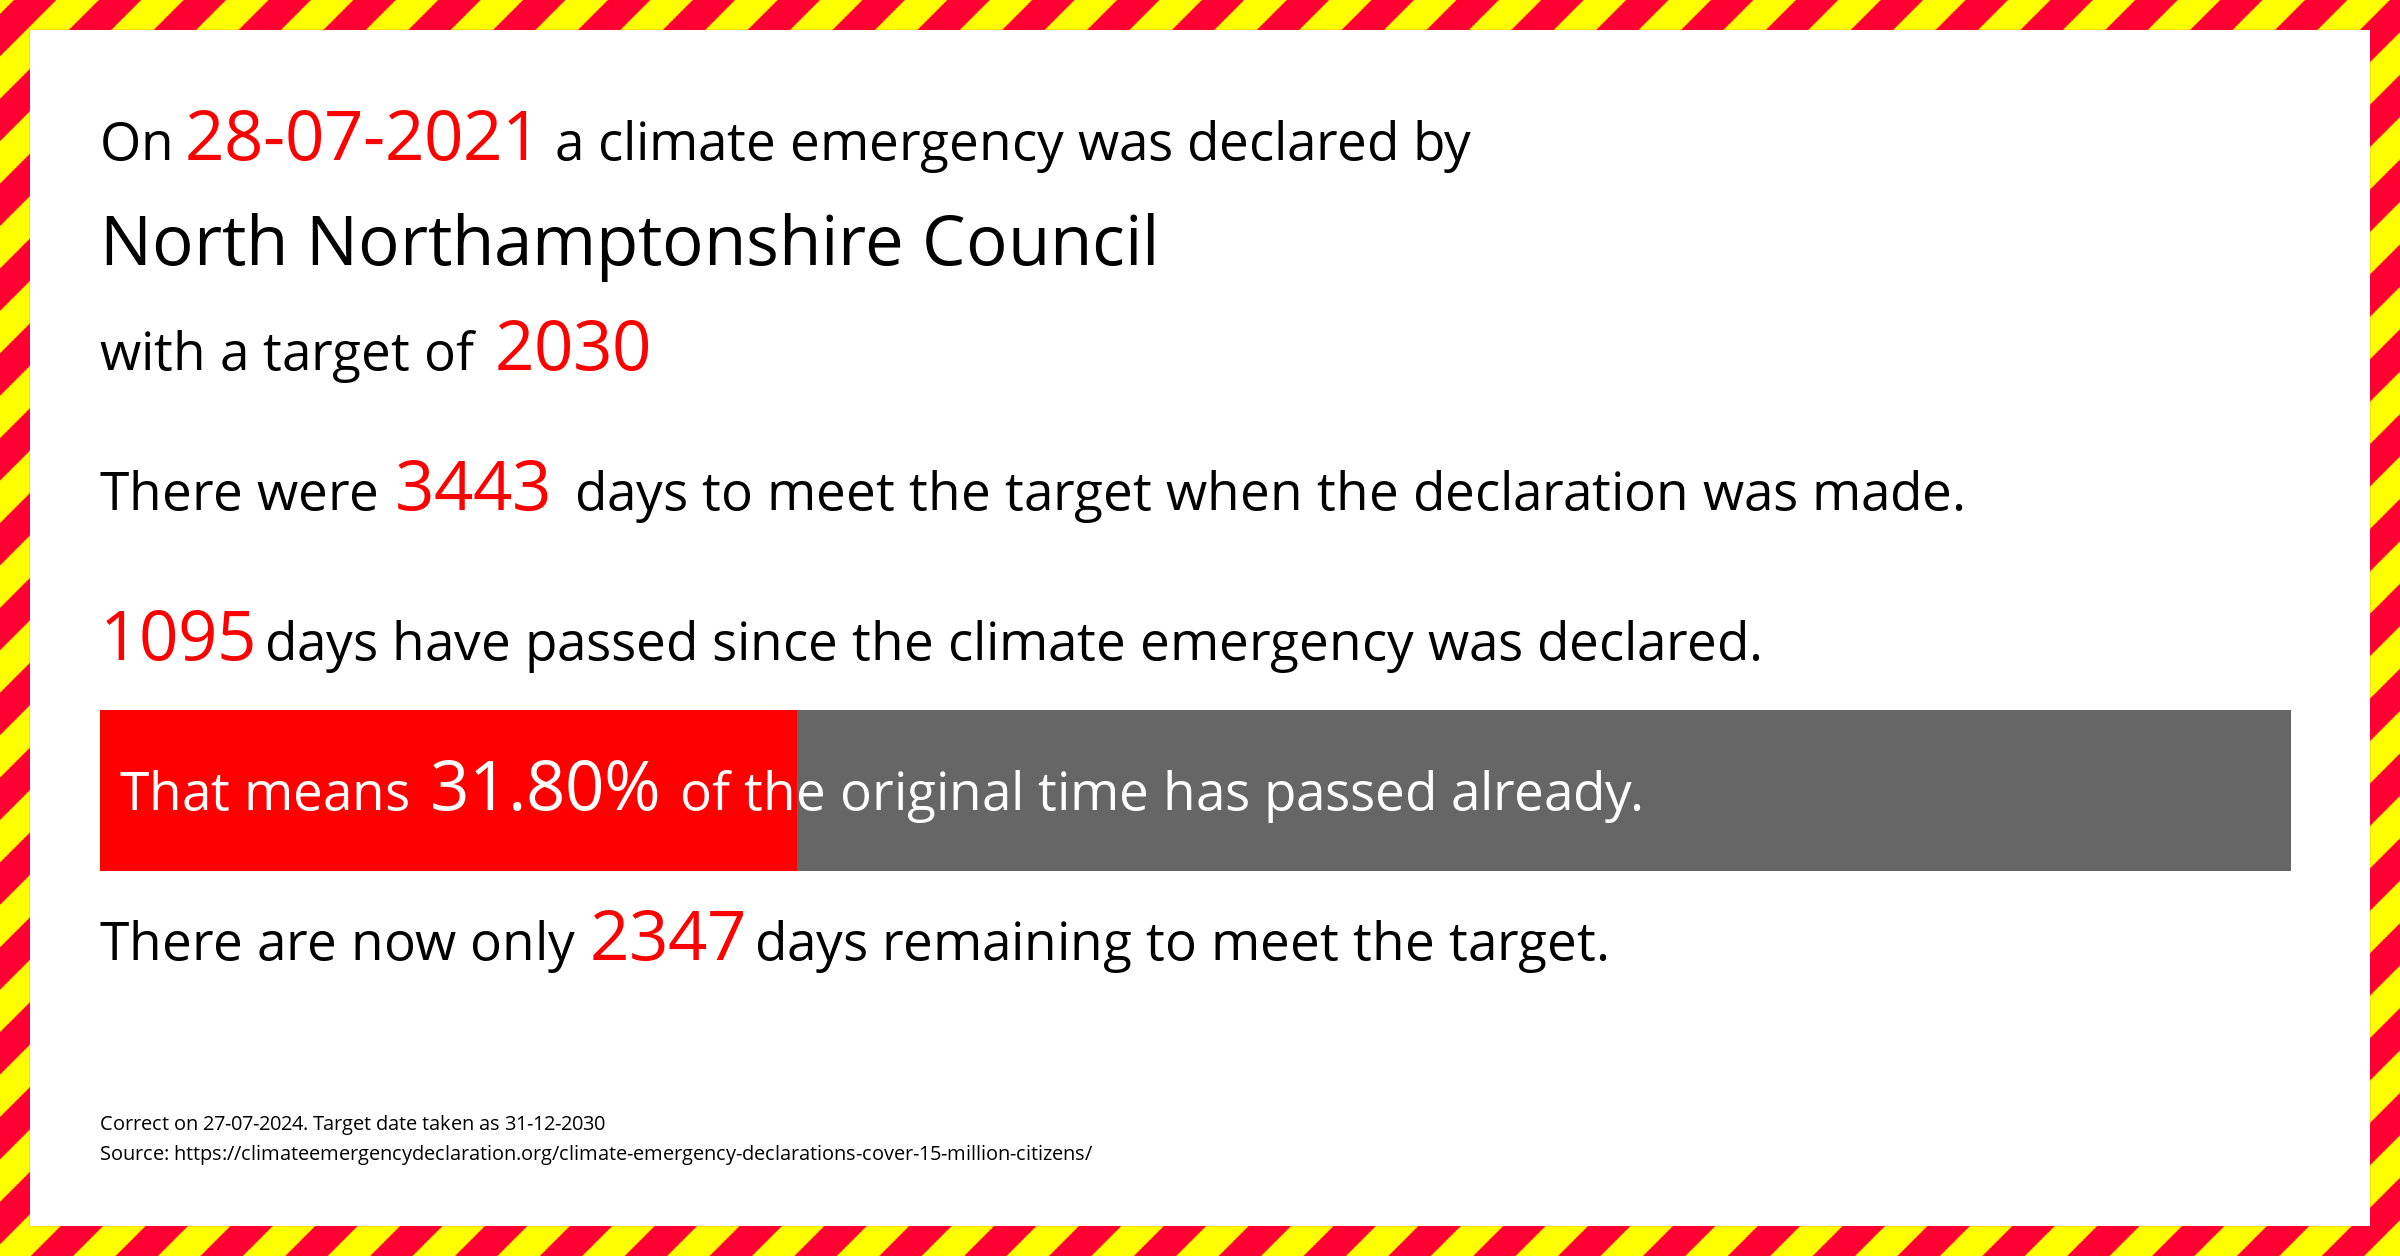 North Northamptonshire Council  declared a Climate emergency on Wednesday 28th July 2021, with a target of 2030.